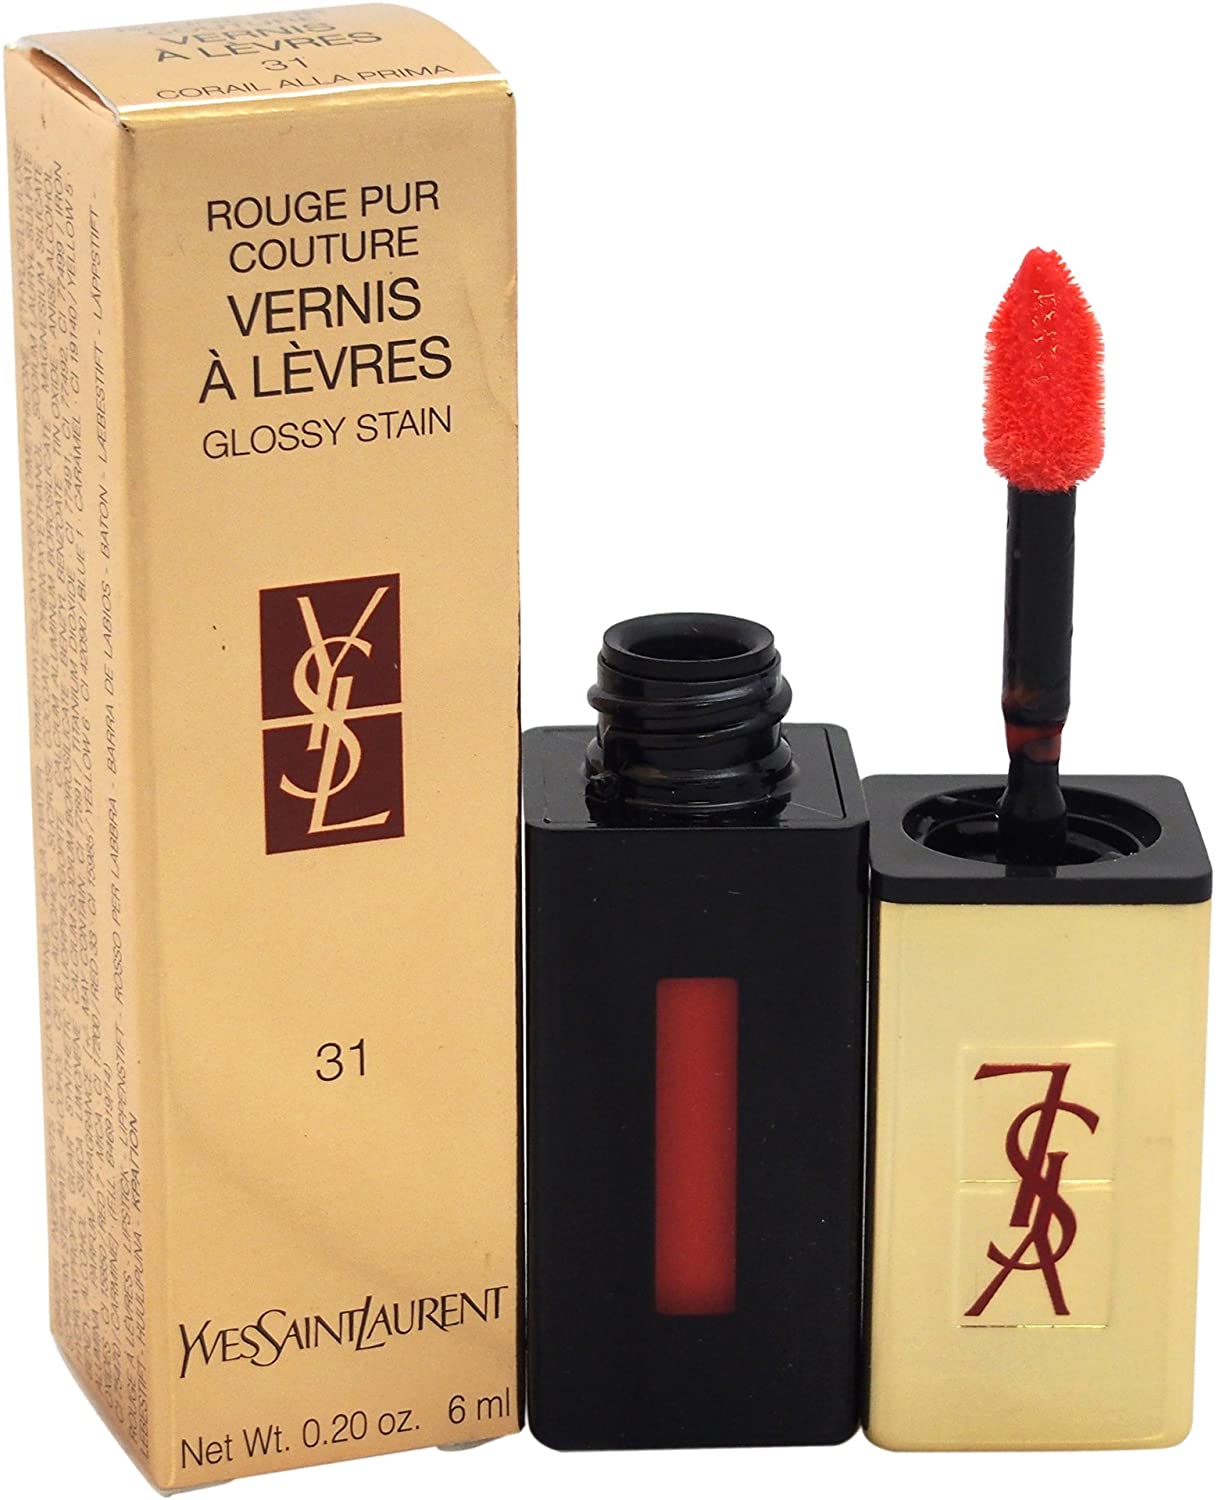 Yves Saint Laurent Rouge Pur Couture Vernis À Lèvres Glossy Stain 6ml – 31 Corail Alma Prima